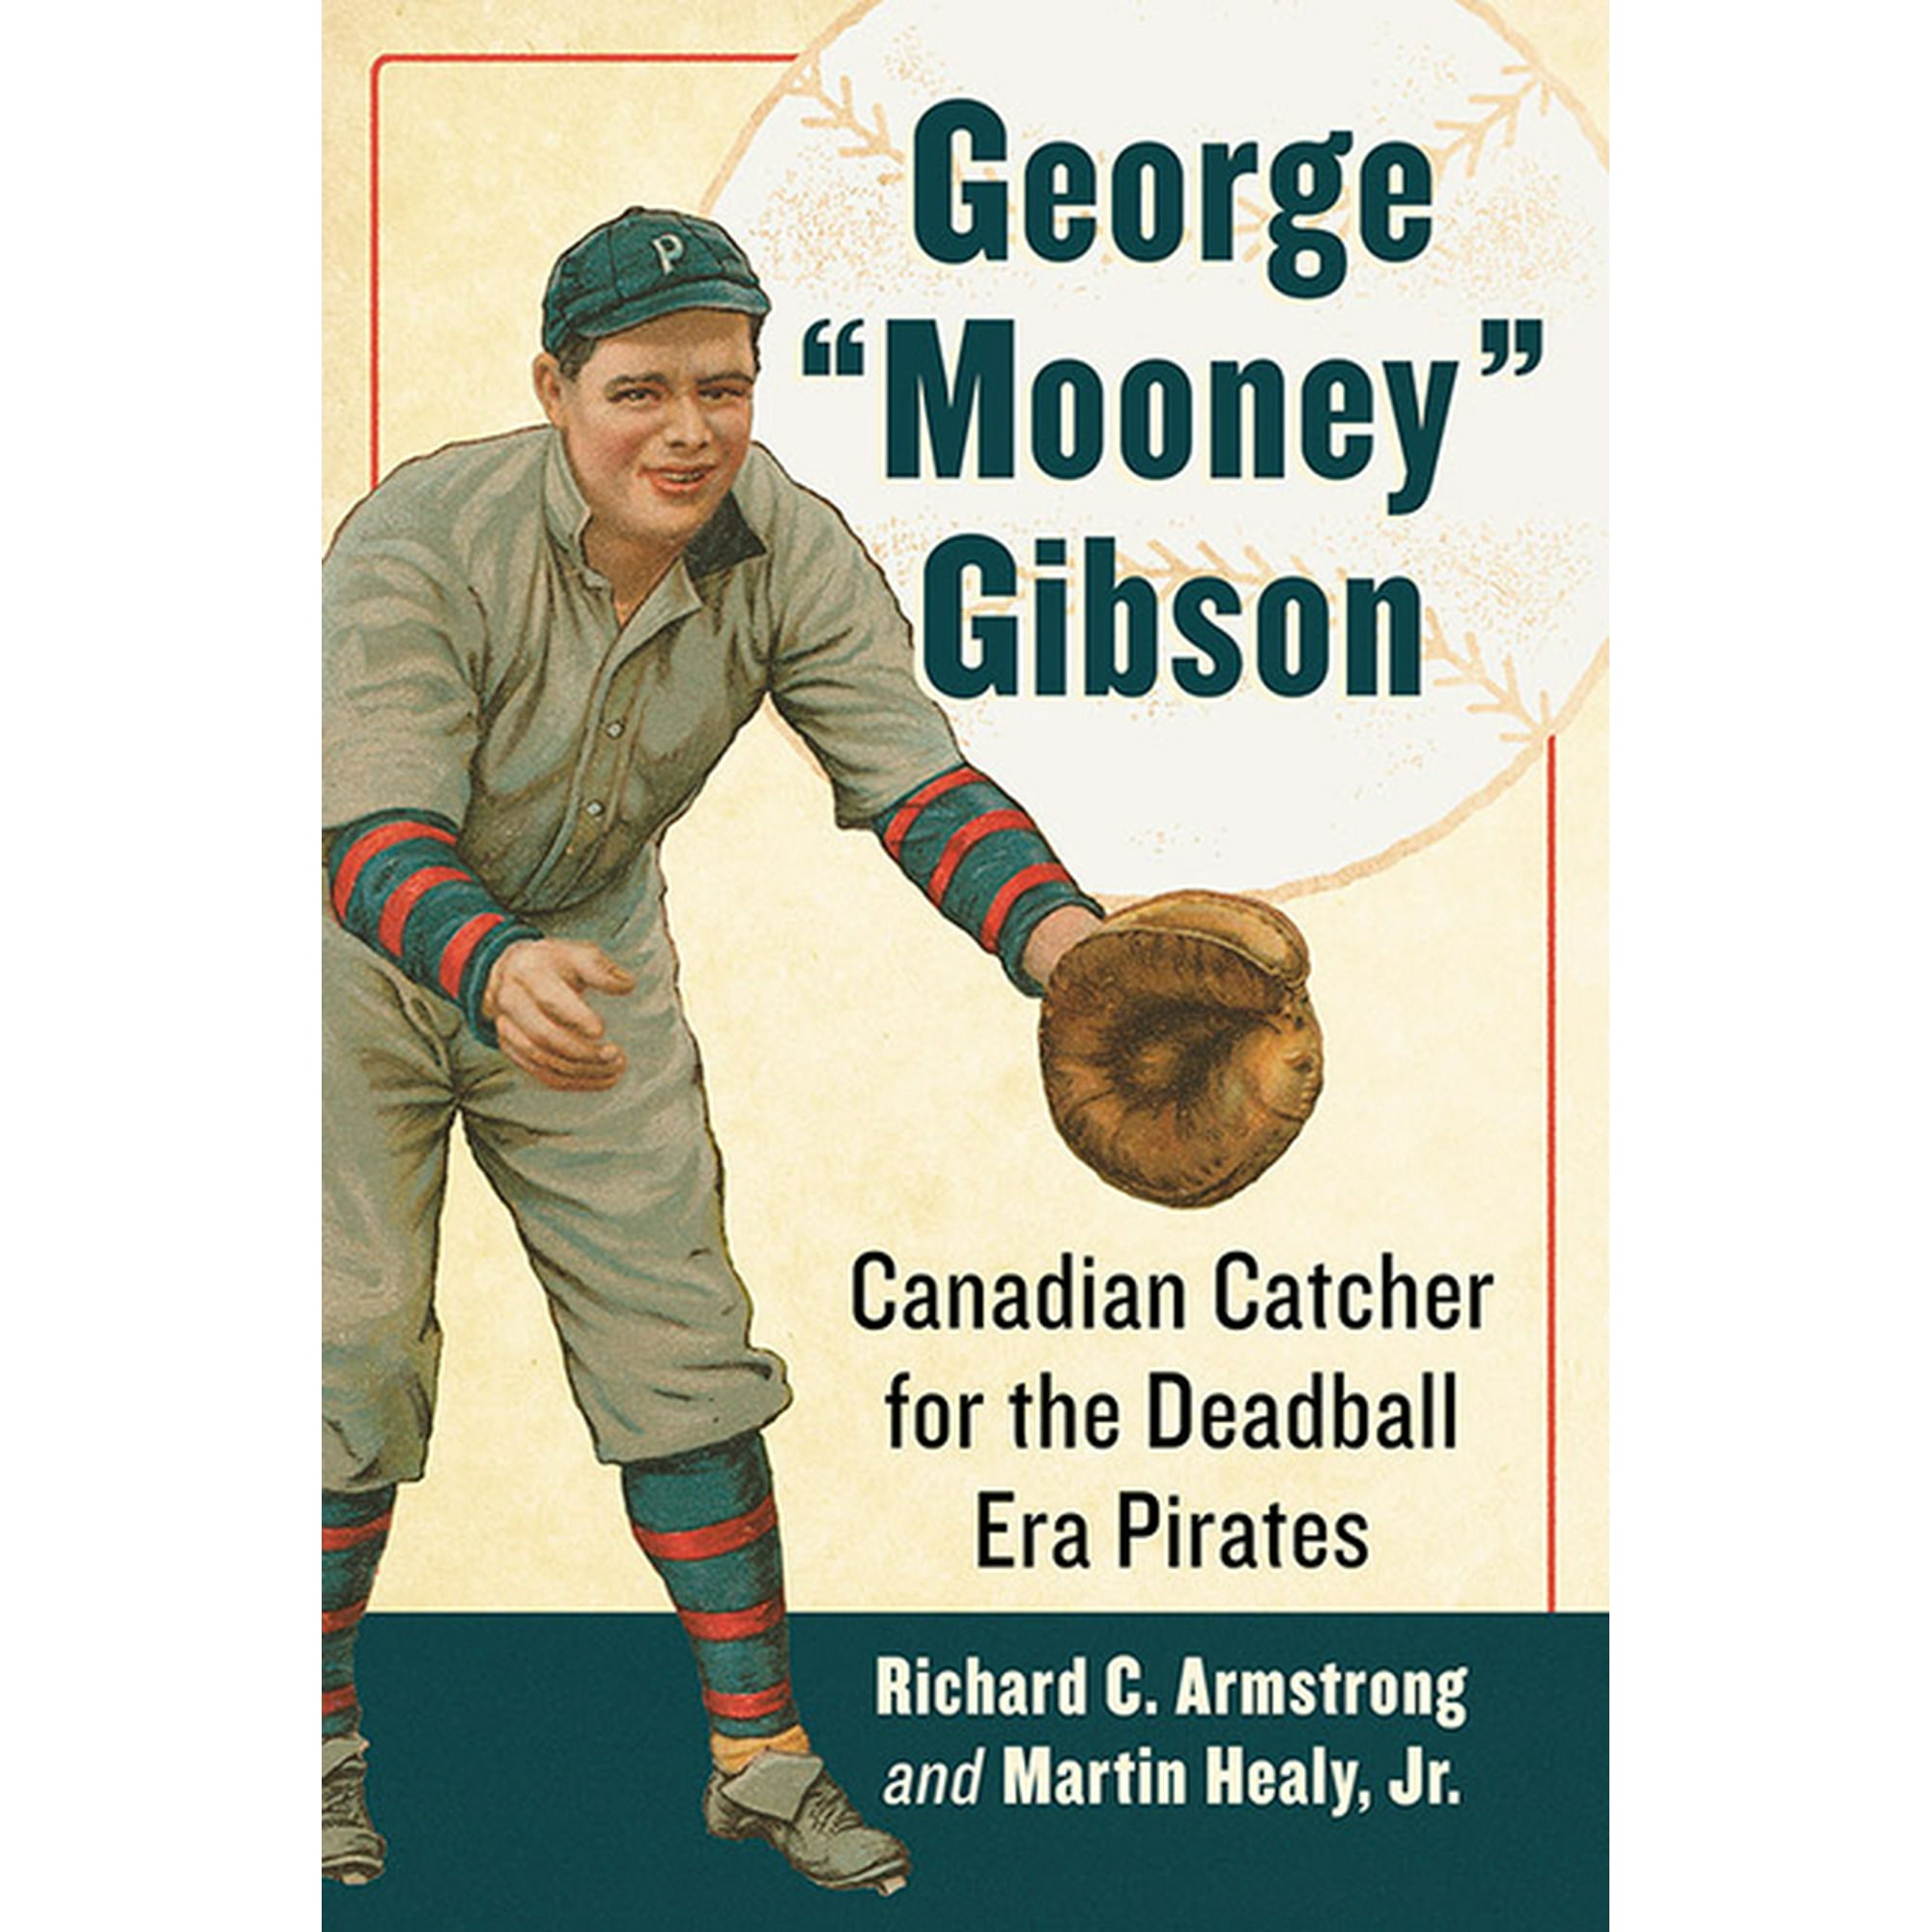 George Mooney Gibson : Canadian Catcher for the Deadball Era